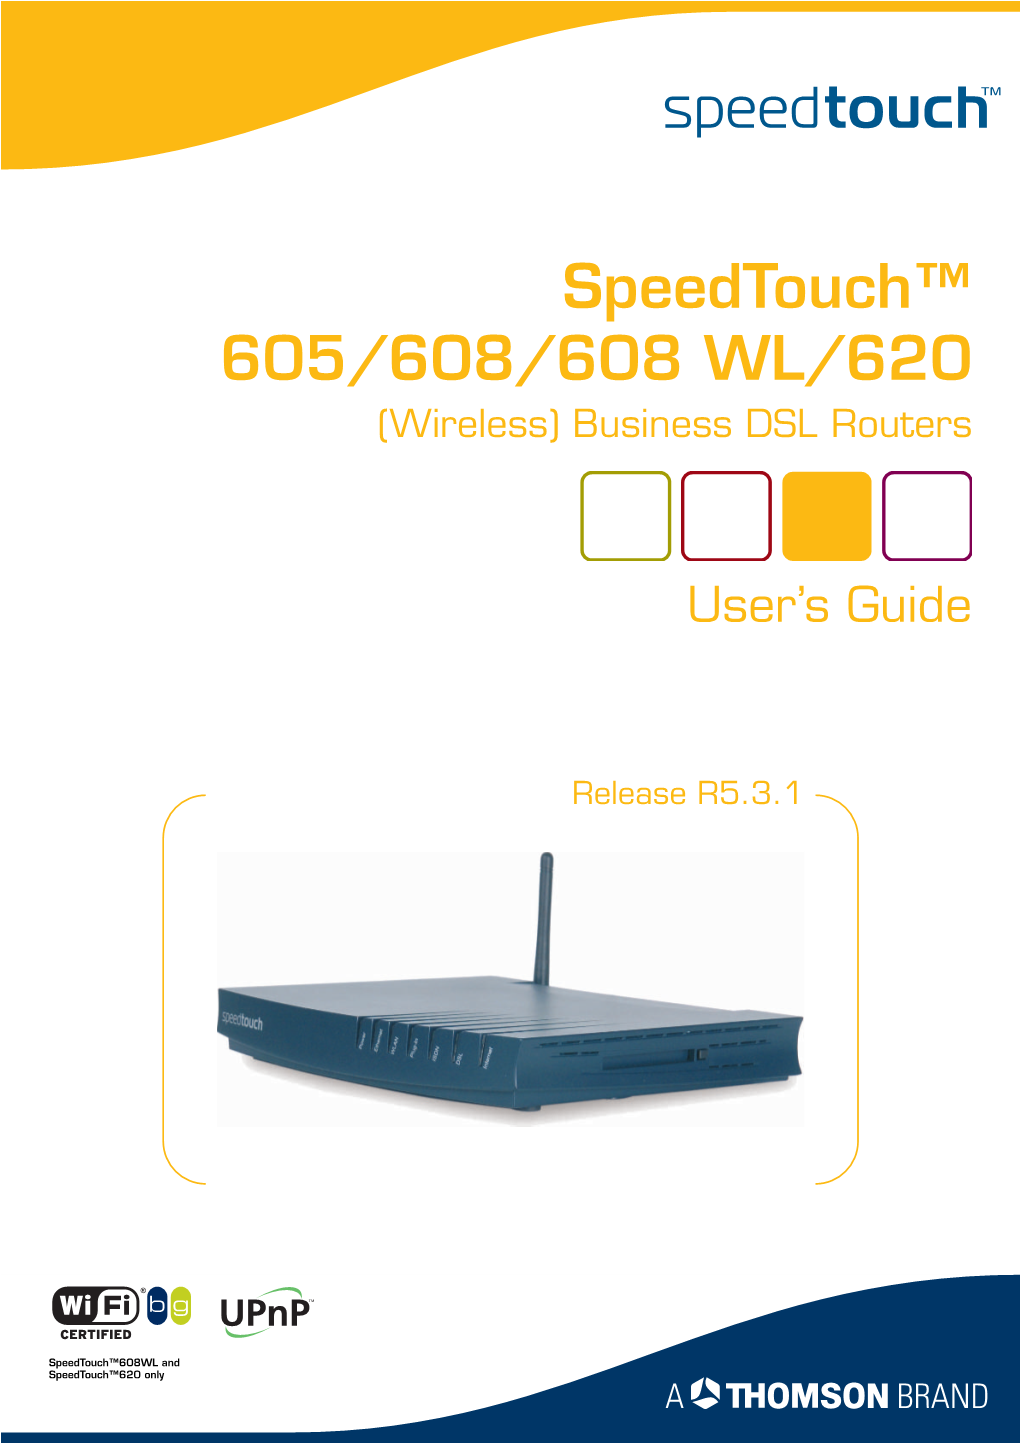 Speedtouch™ 605/608/608 WL/620 (Wireless) Business DSL Routers